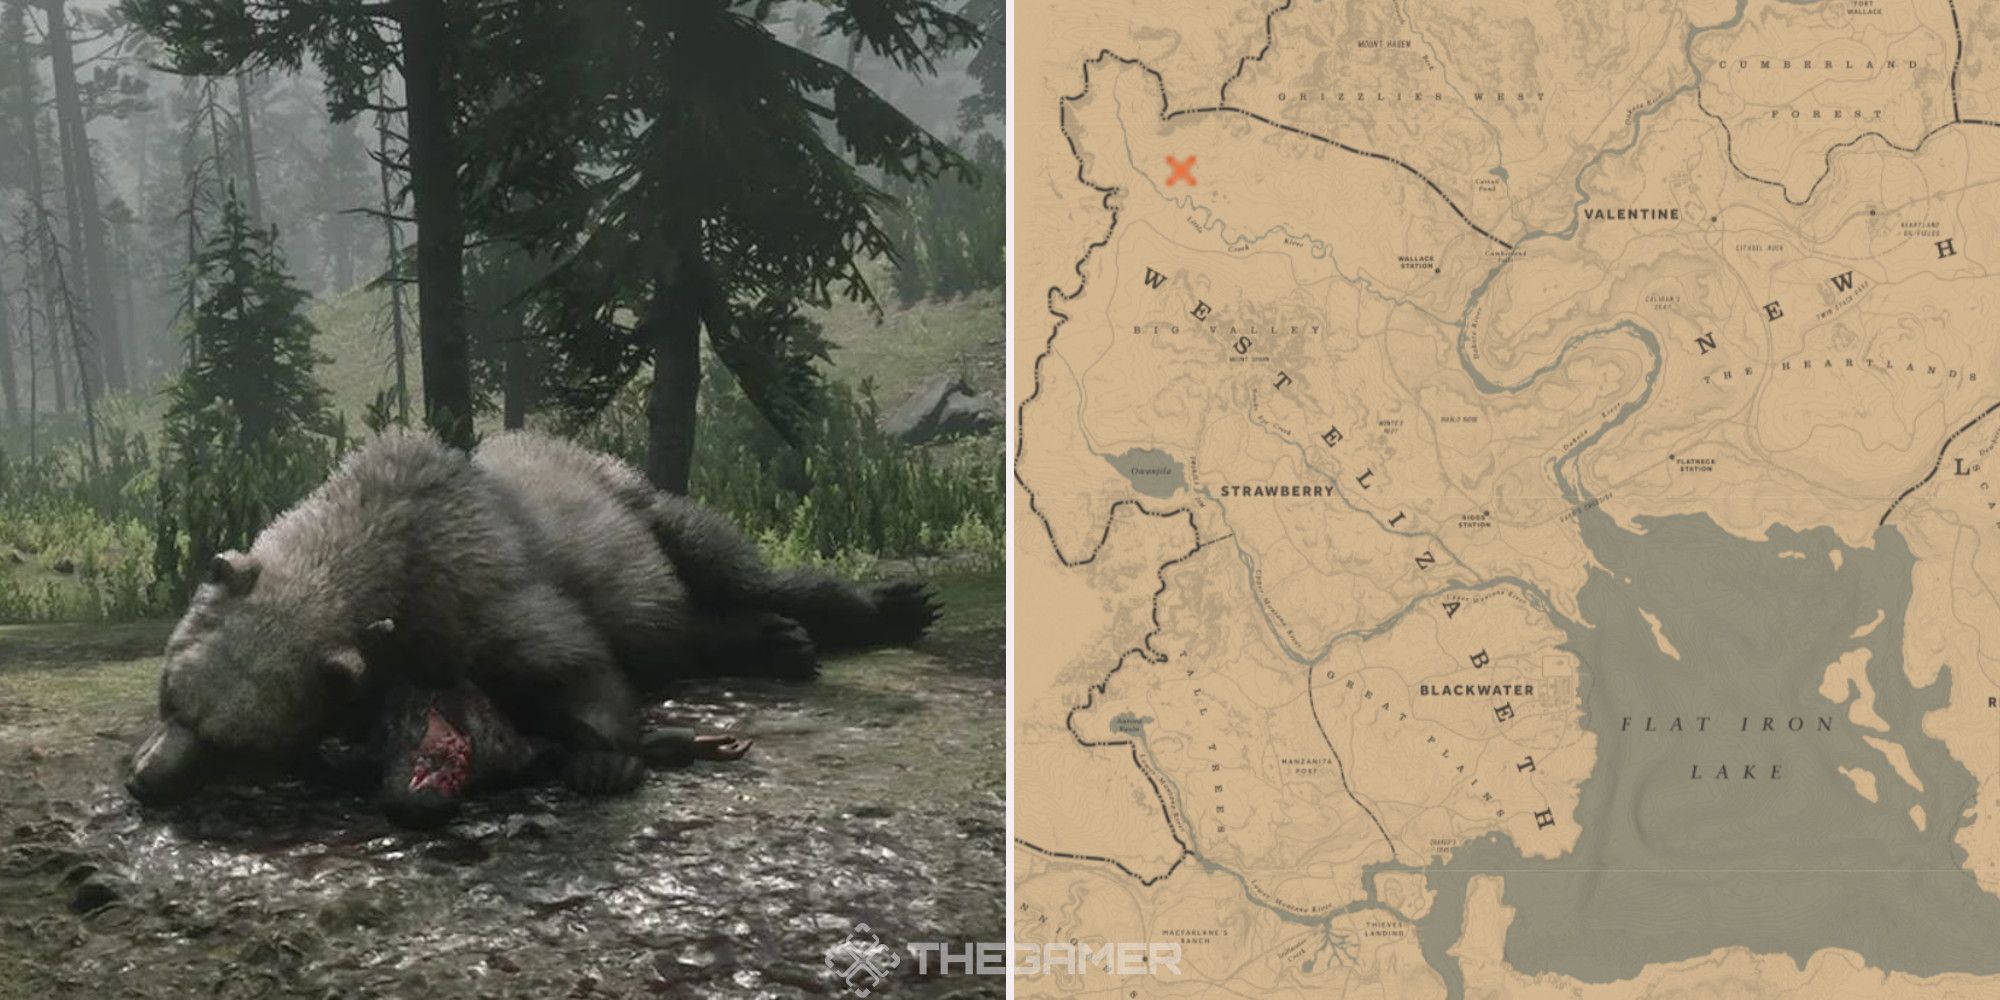 A dead bear collapsed on top of a human body in Red Dead Redemption 2, next to an image of where it can be found marked on the map.